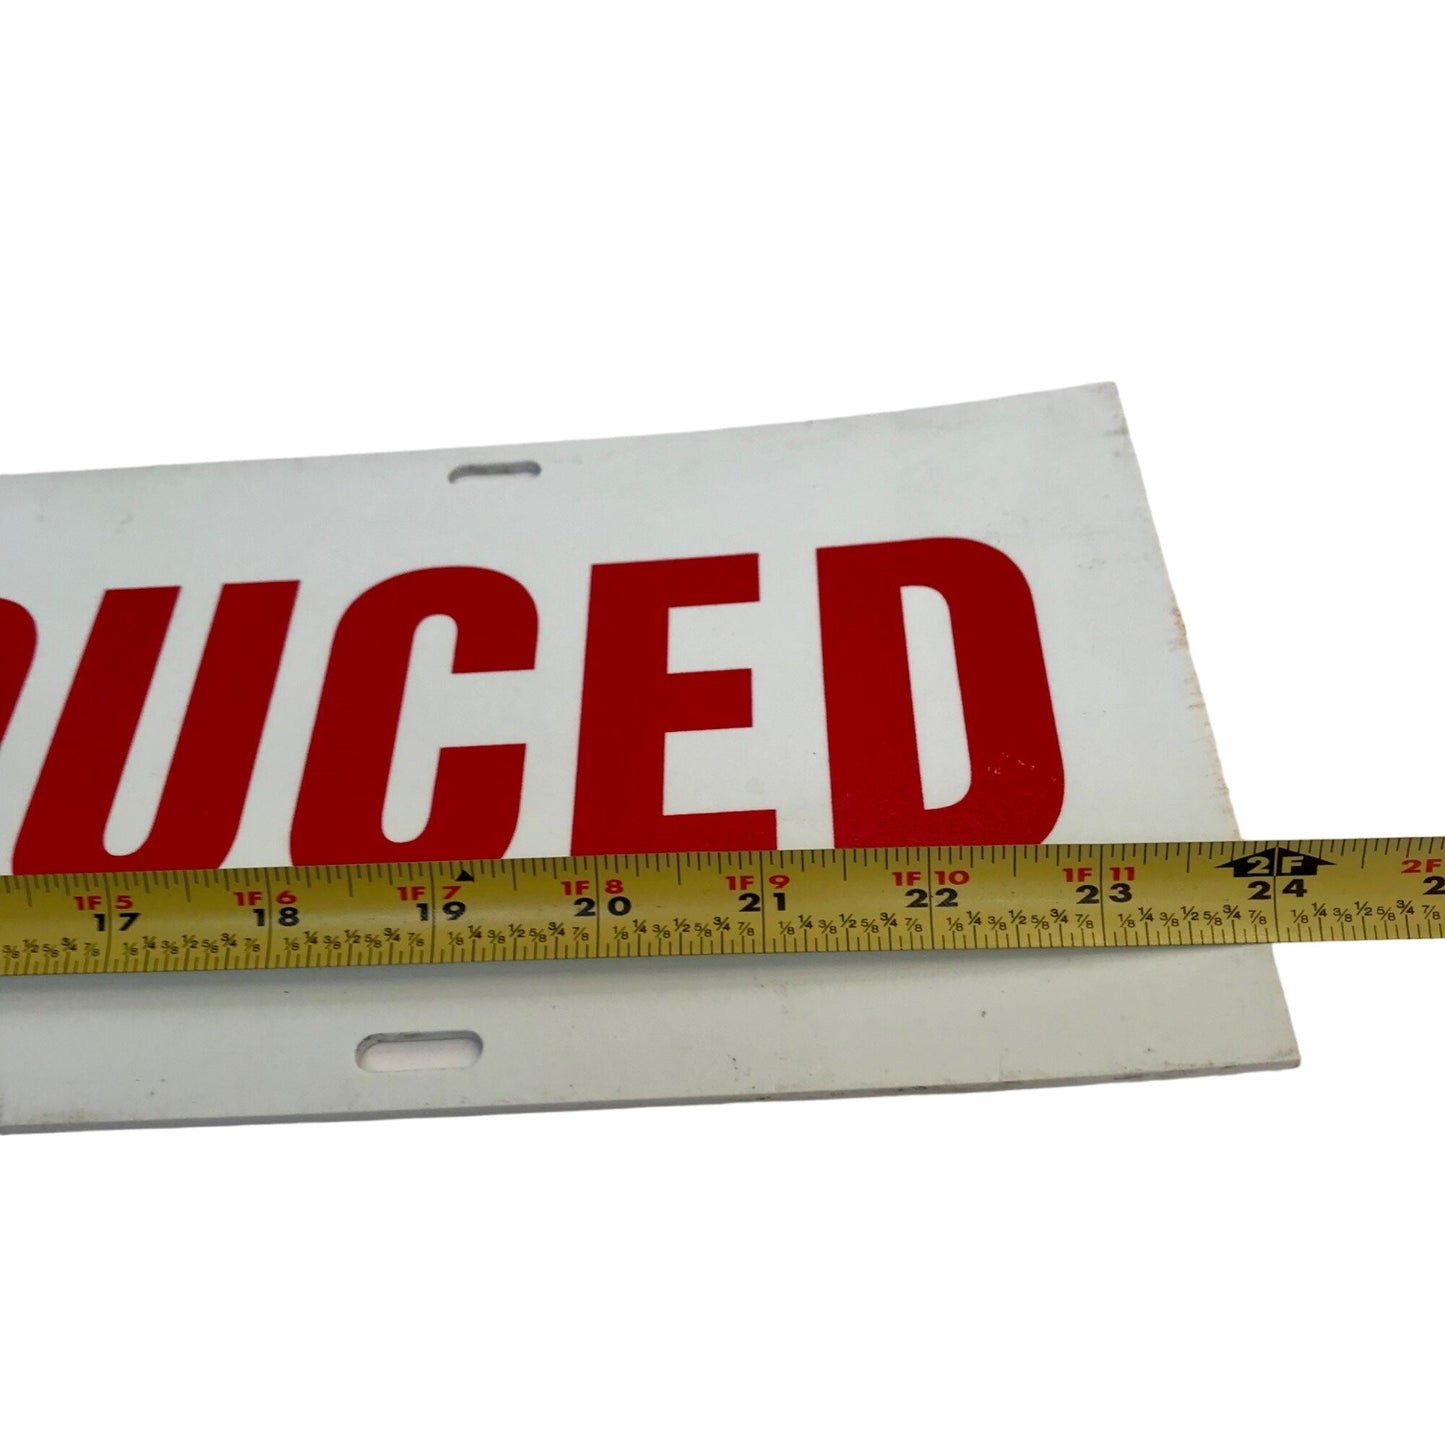 Vintage PRICE REDUCED Plastic Sign 24” Double-Sided